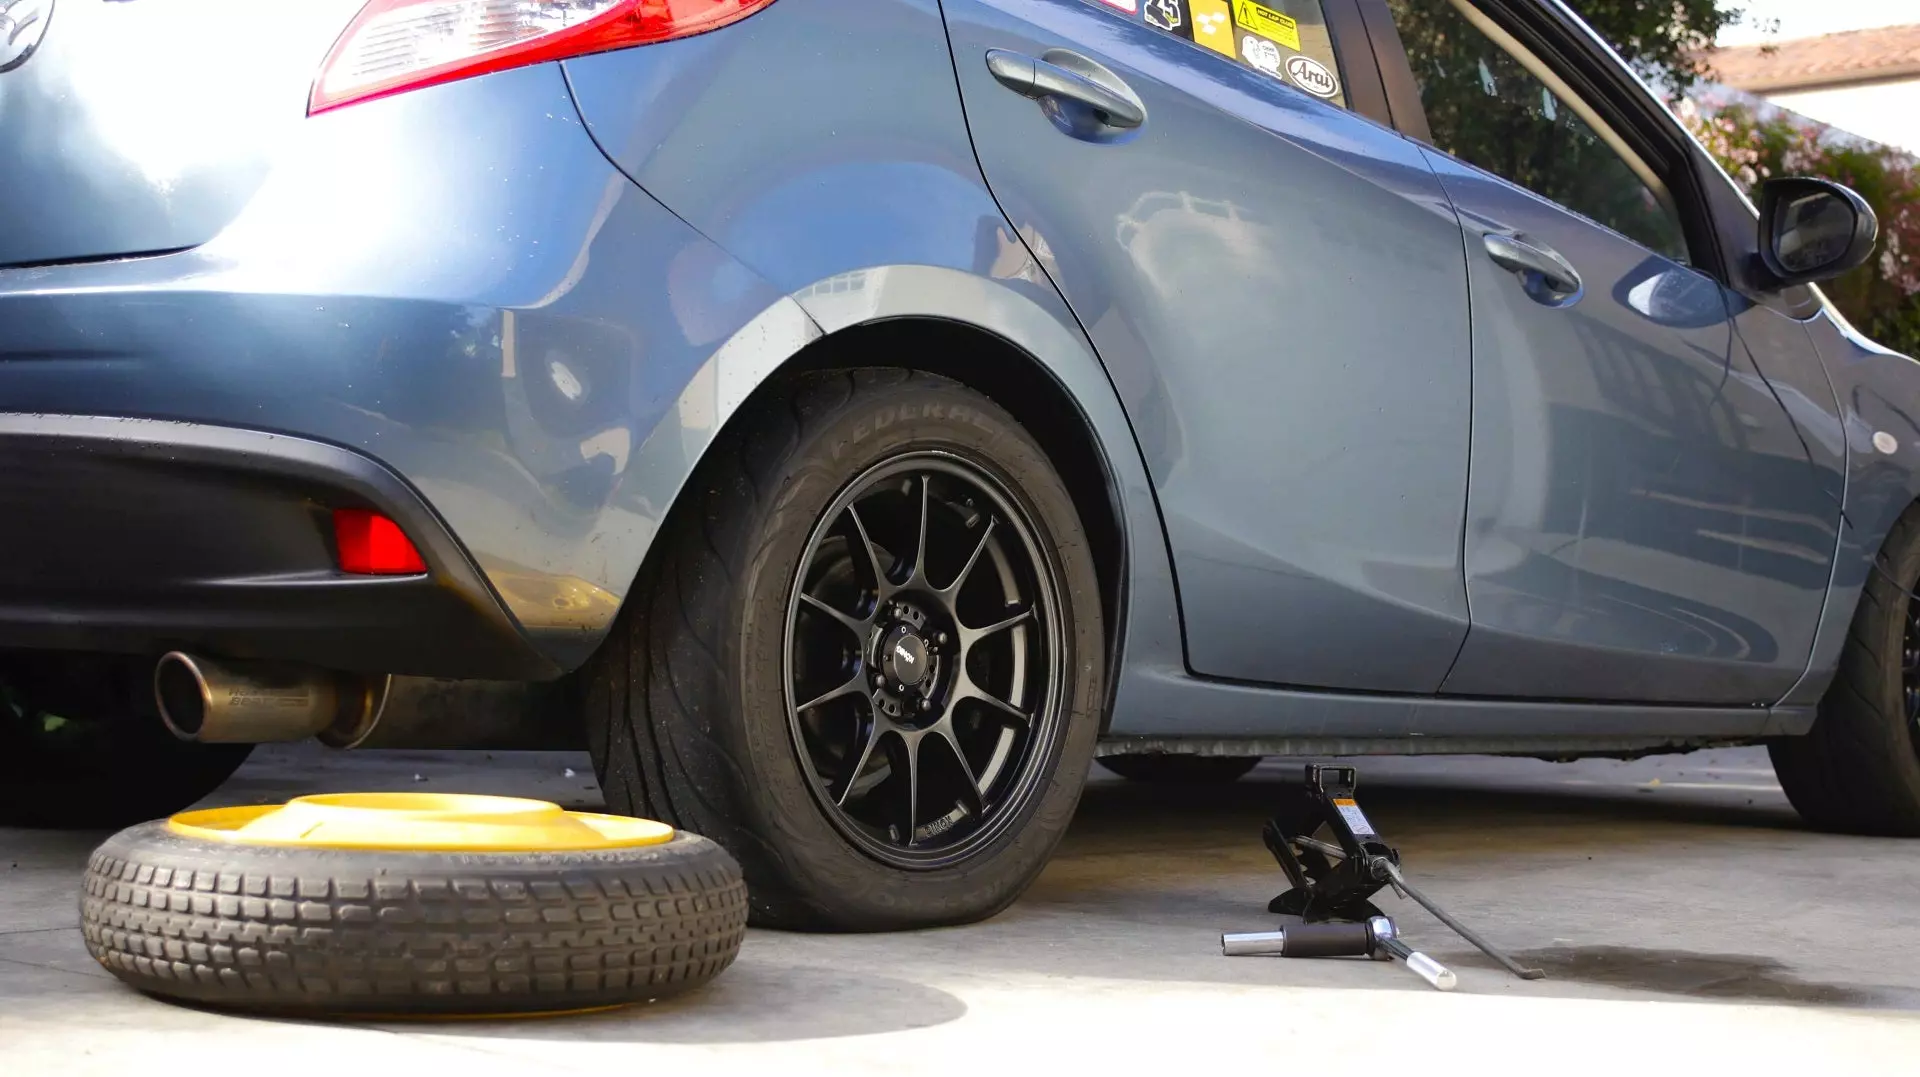 Mastering the Basics: How To Change a Tire